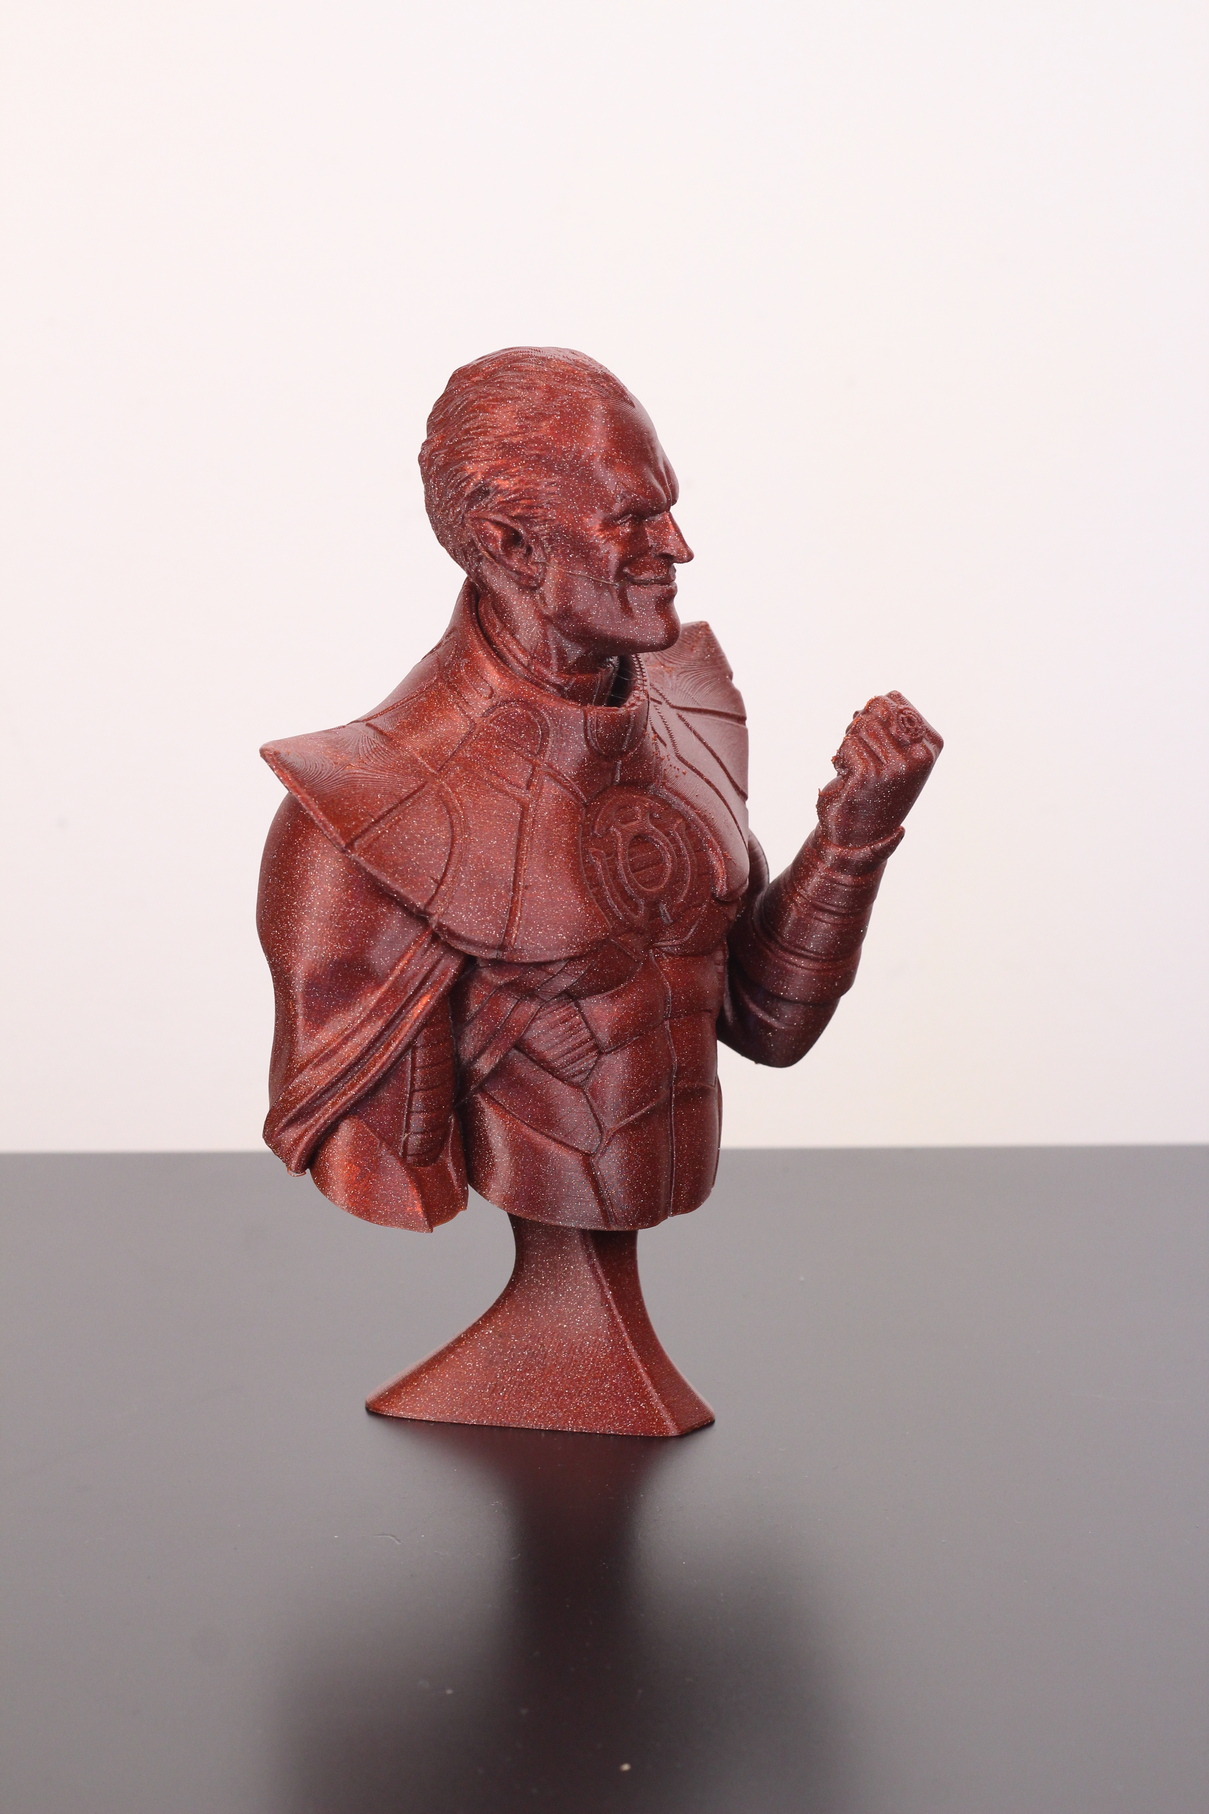 Sinestro Bust printed on the BIQU B1 SE Plus 5 | BIQU B1 SE PLUS Review: SKR 2 and ABL from Factory